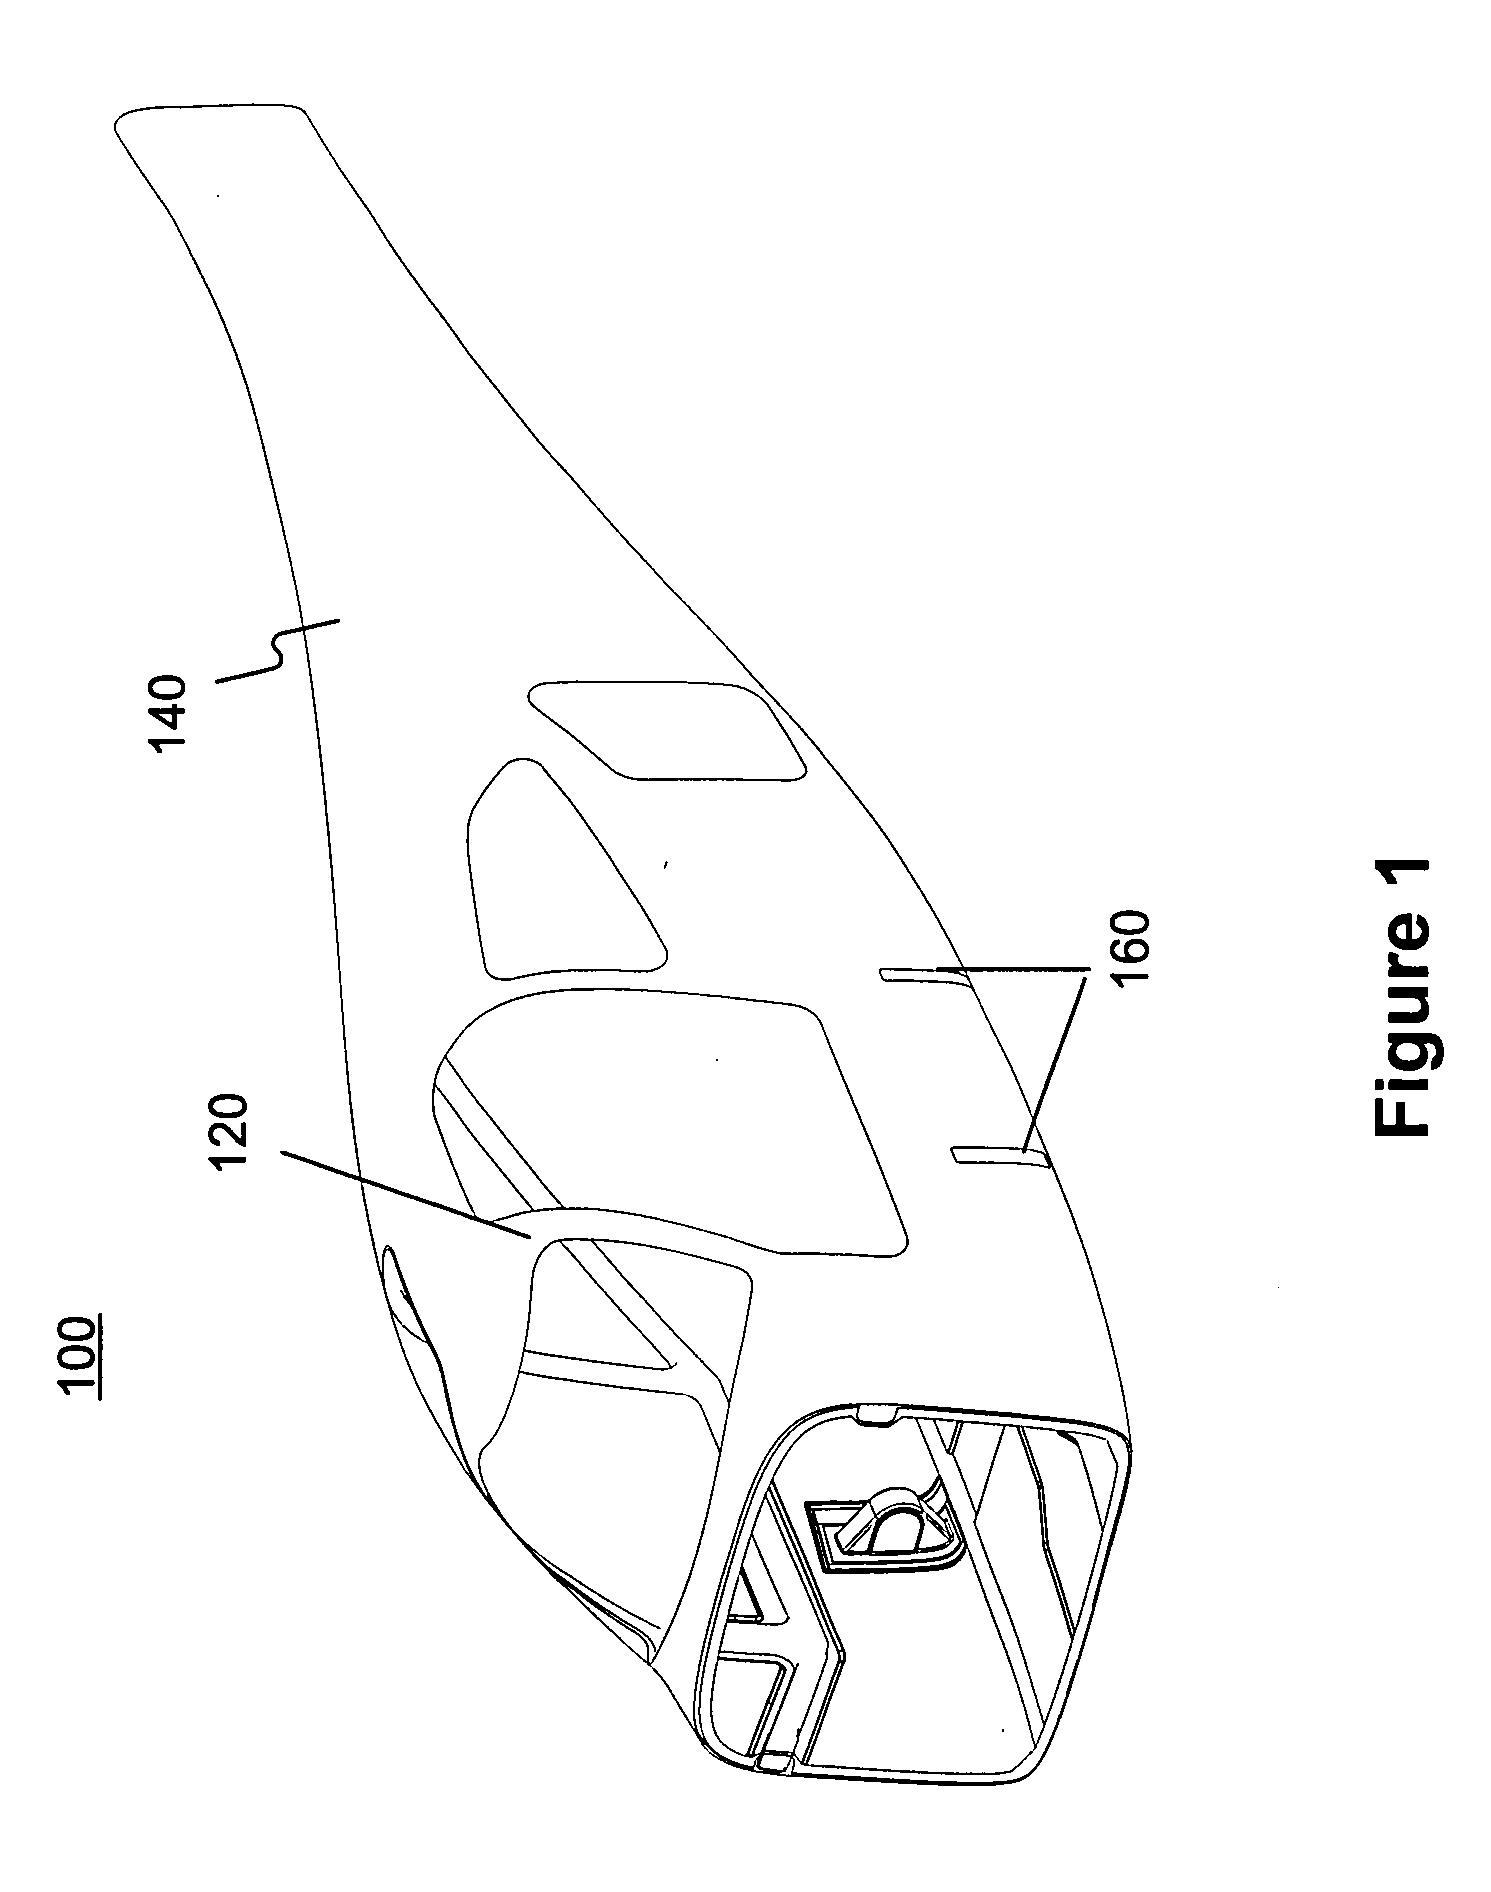 Media removal apparatus and methods of removing media